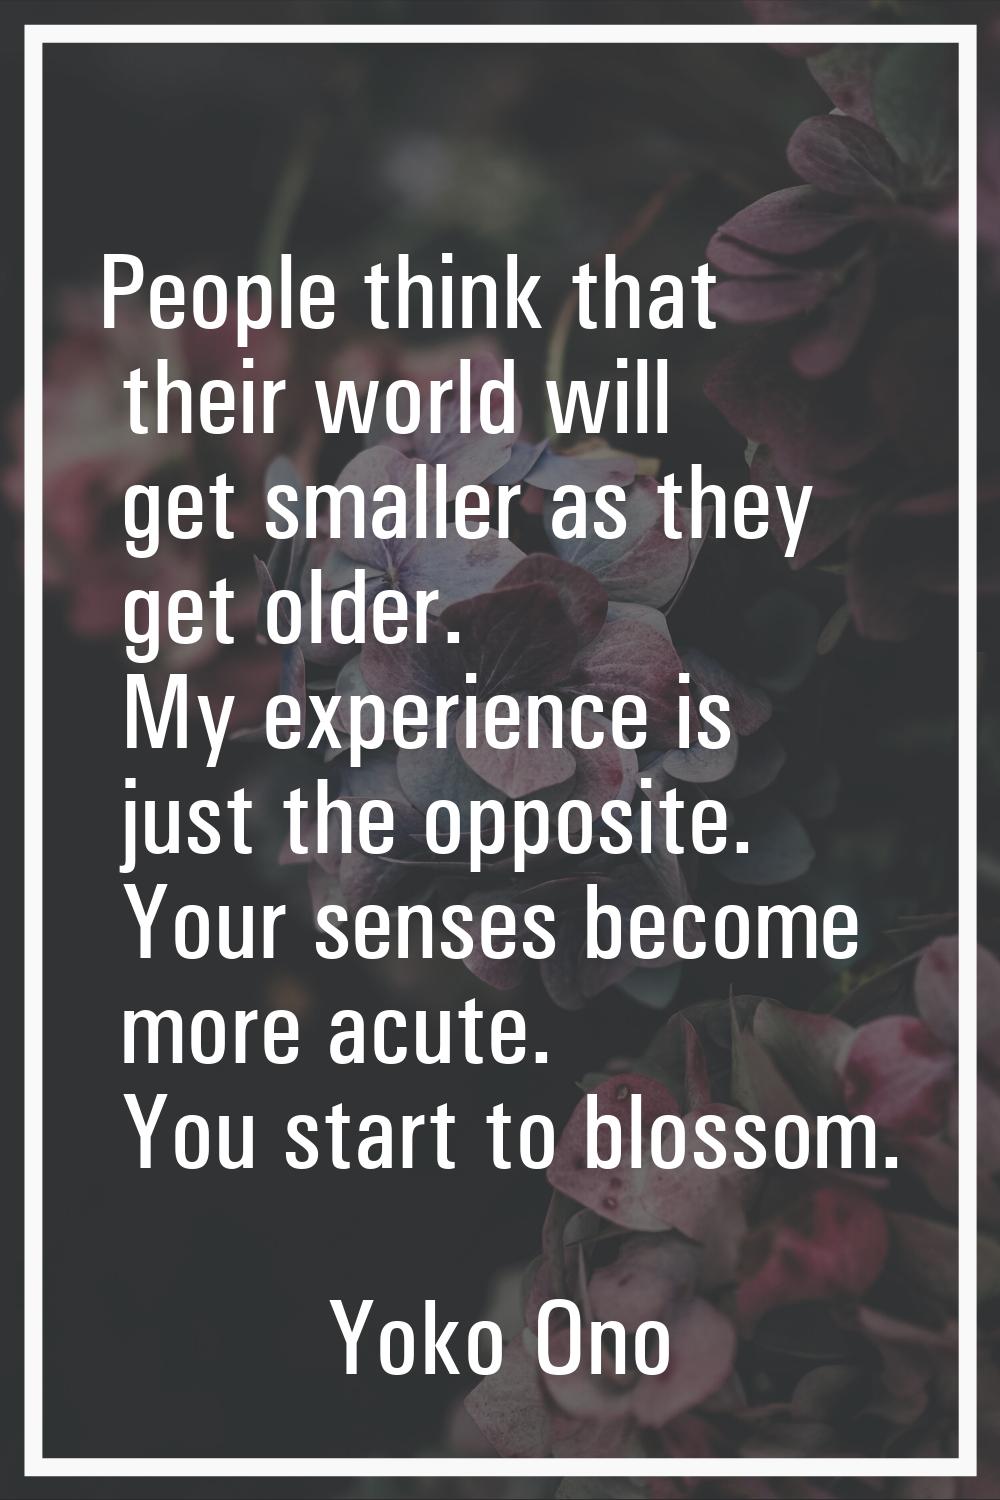 People think that their world will get smaller as they get older. My experience is just the opposit